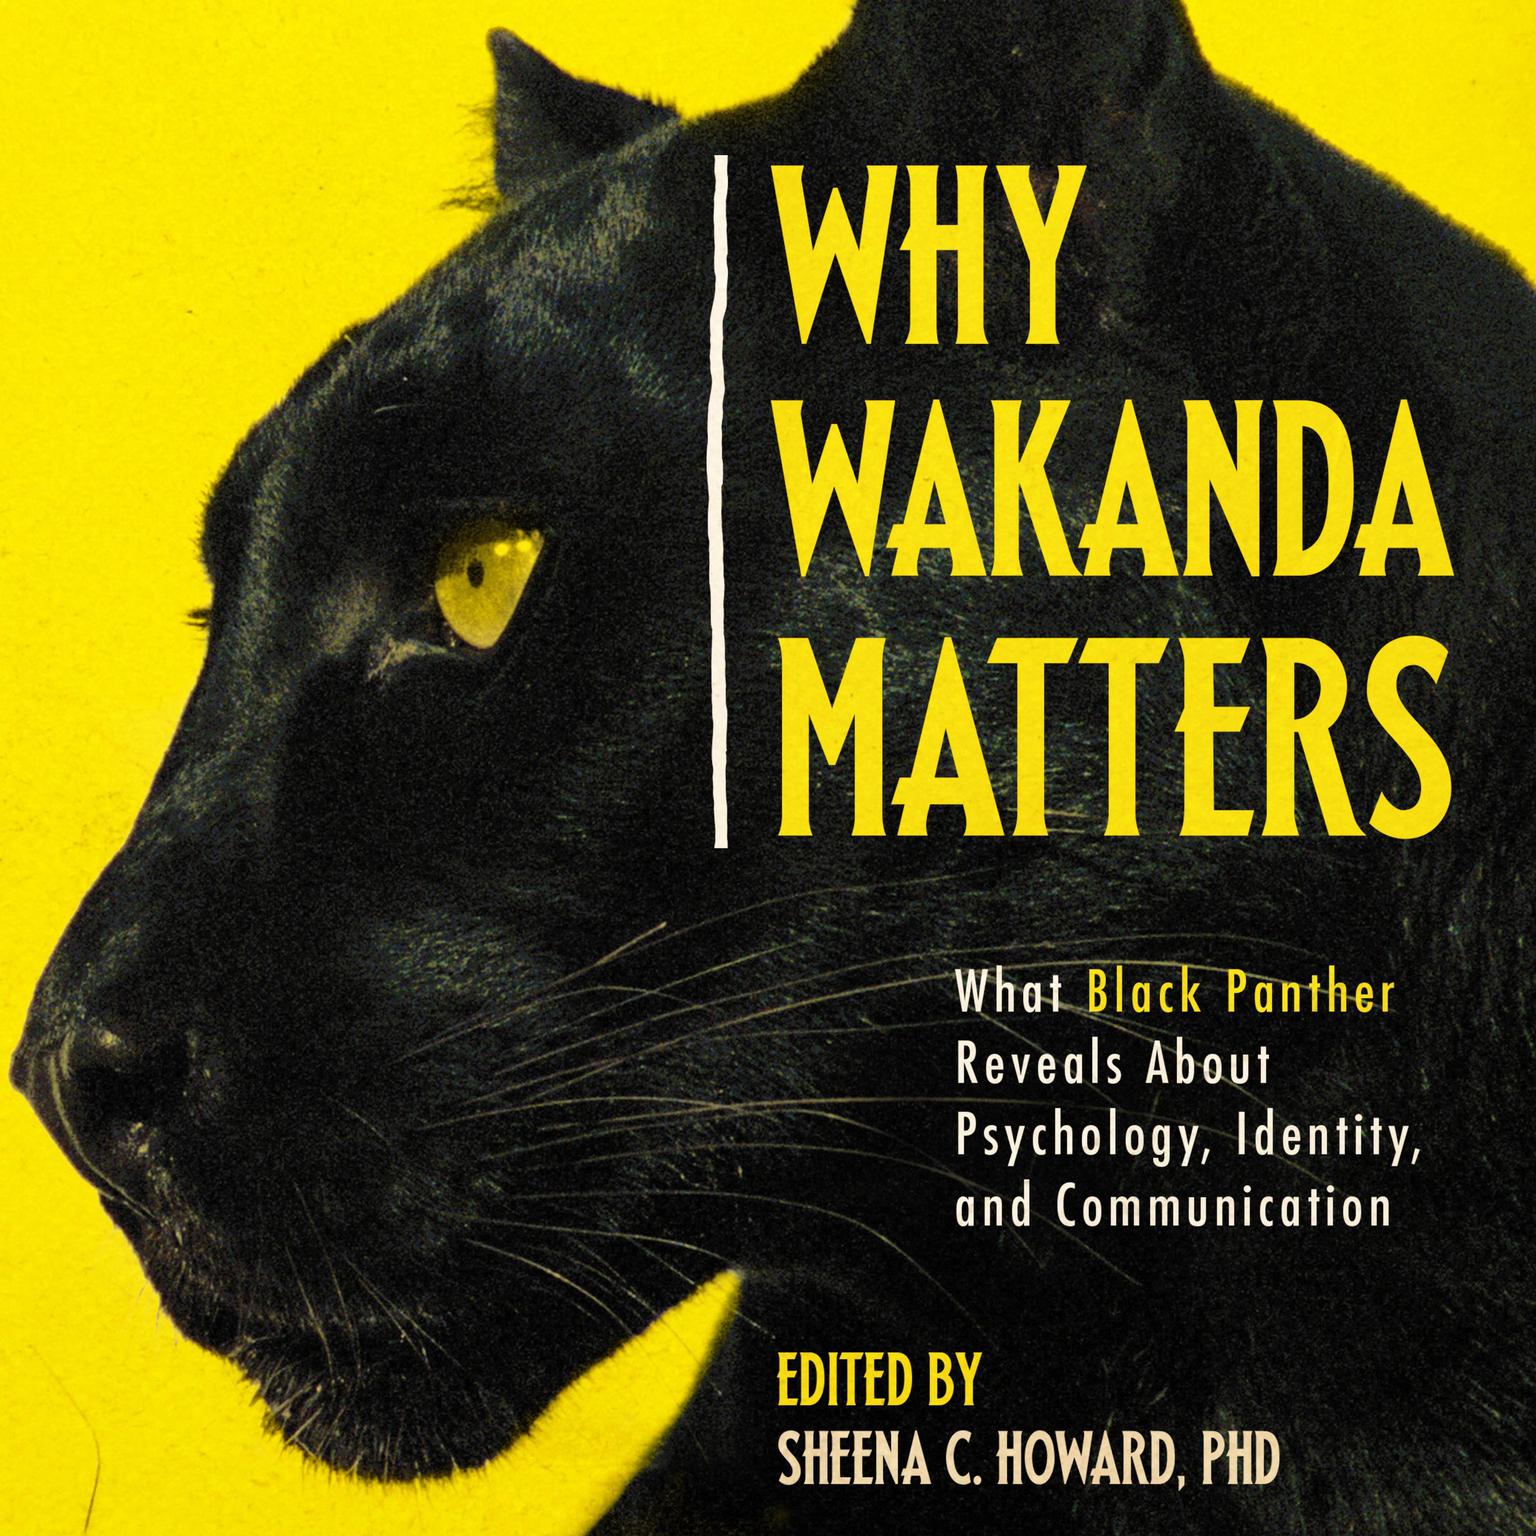 Why Wakanda Matters: What Black Panther Reveals About Psychology, Identity, and Communication Audiobook, by Sheena C. Howard